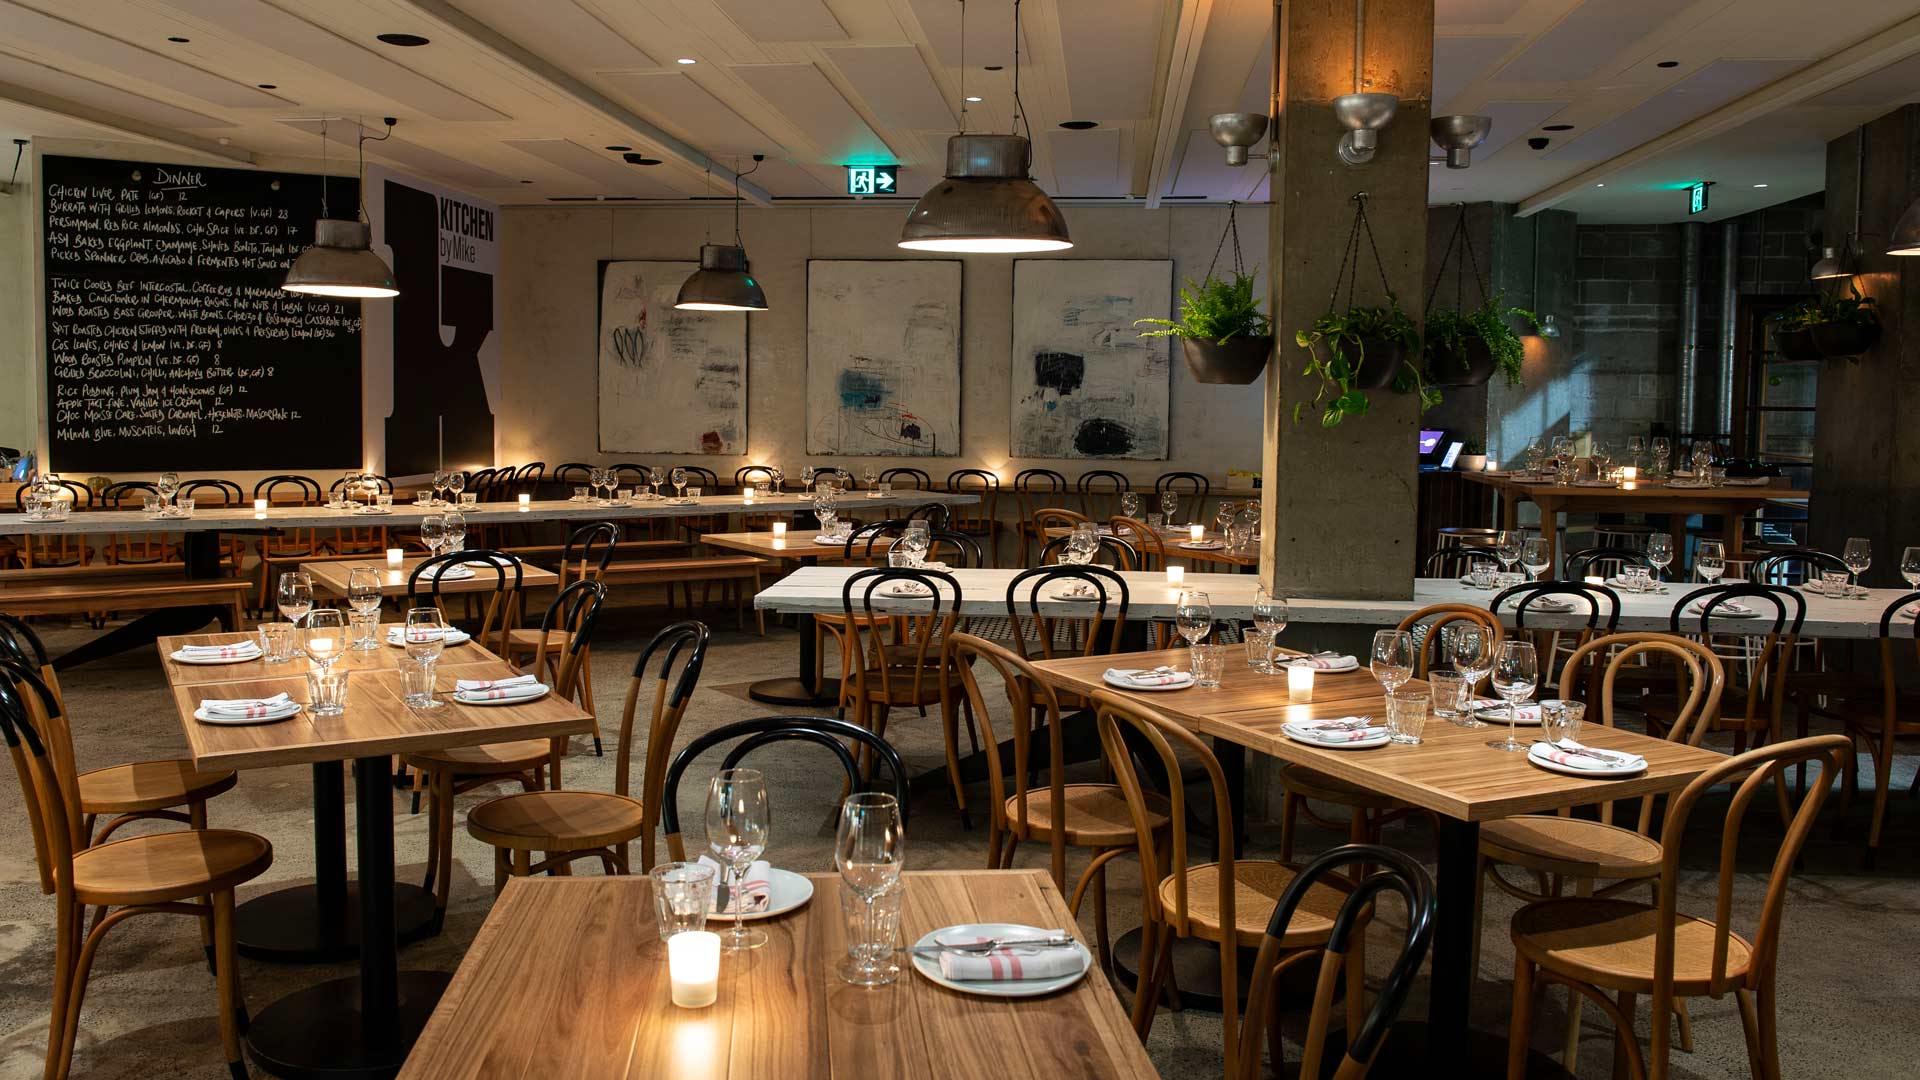 Kitchen By Mike Is Now Open in the CBD for Next-Level Work Lunches and After-Work Snacks